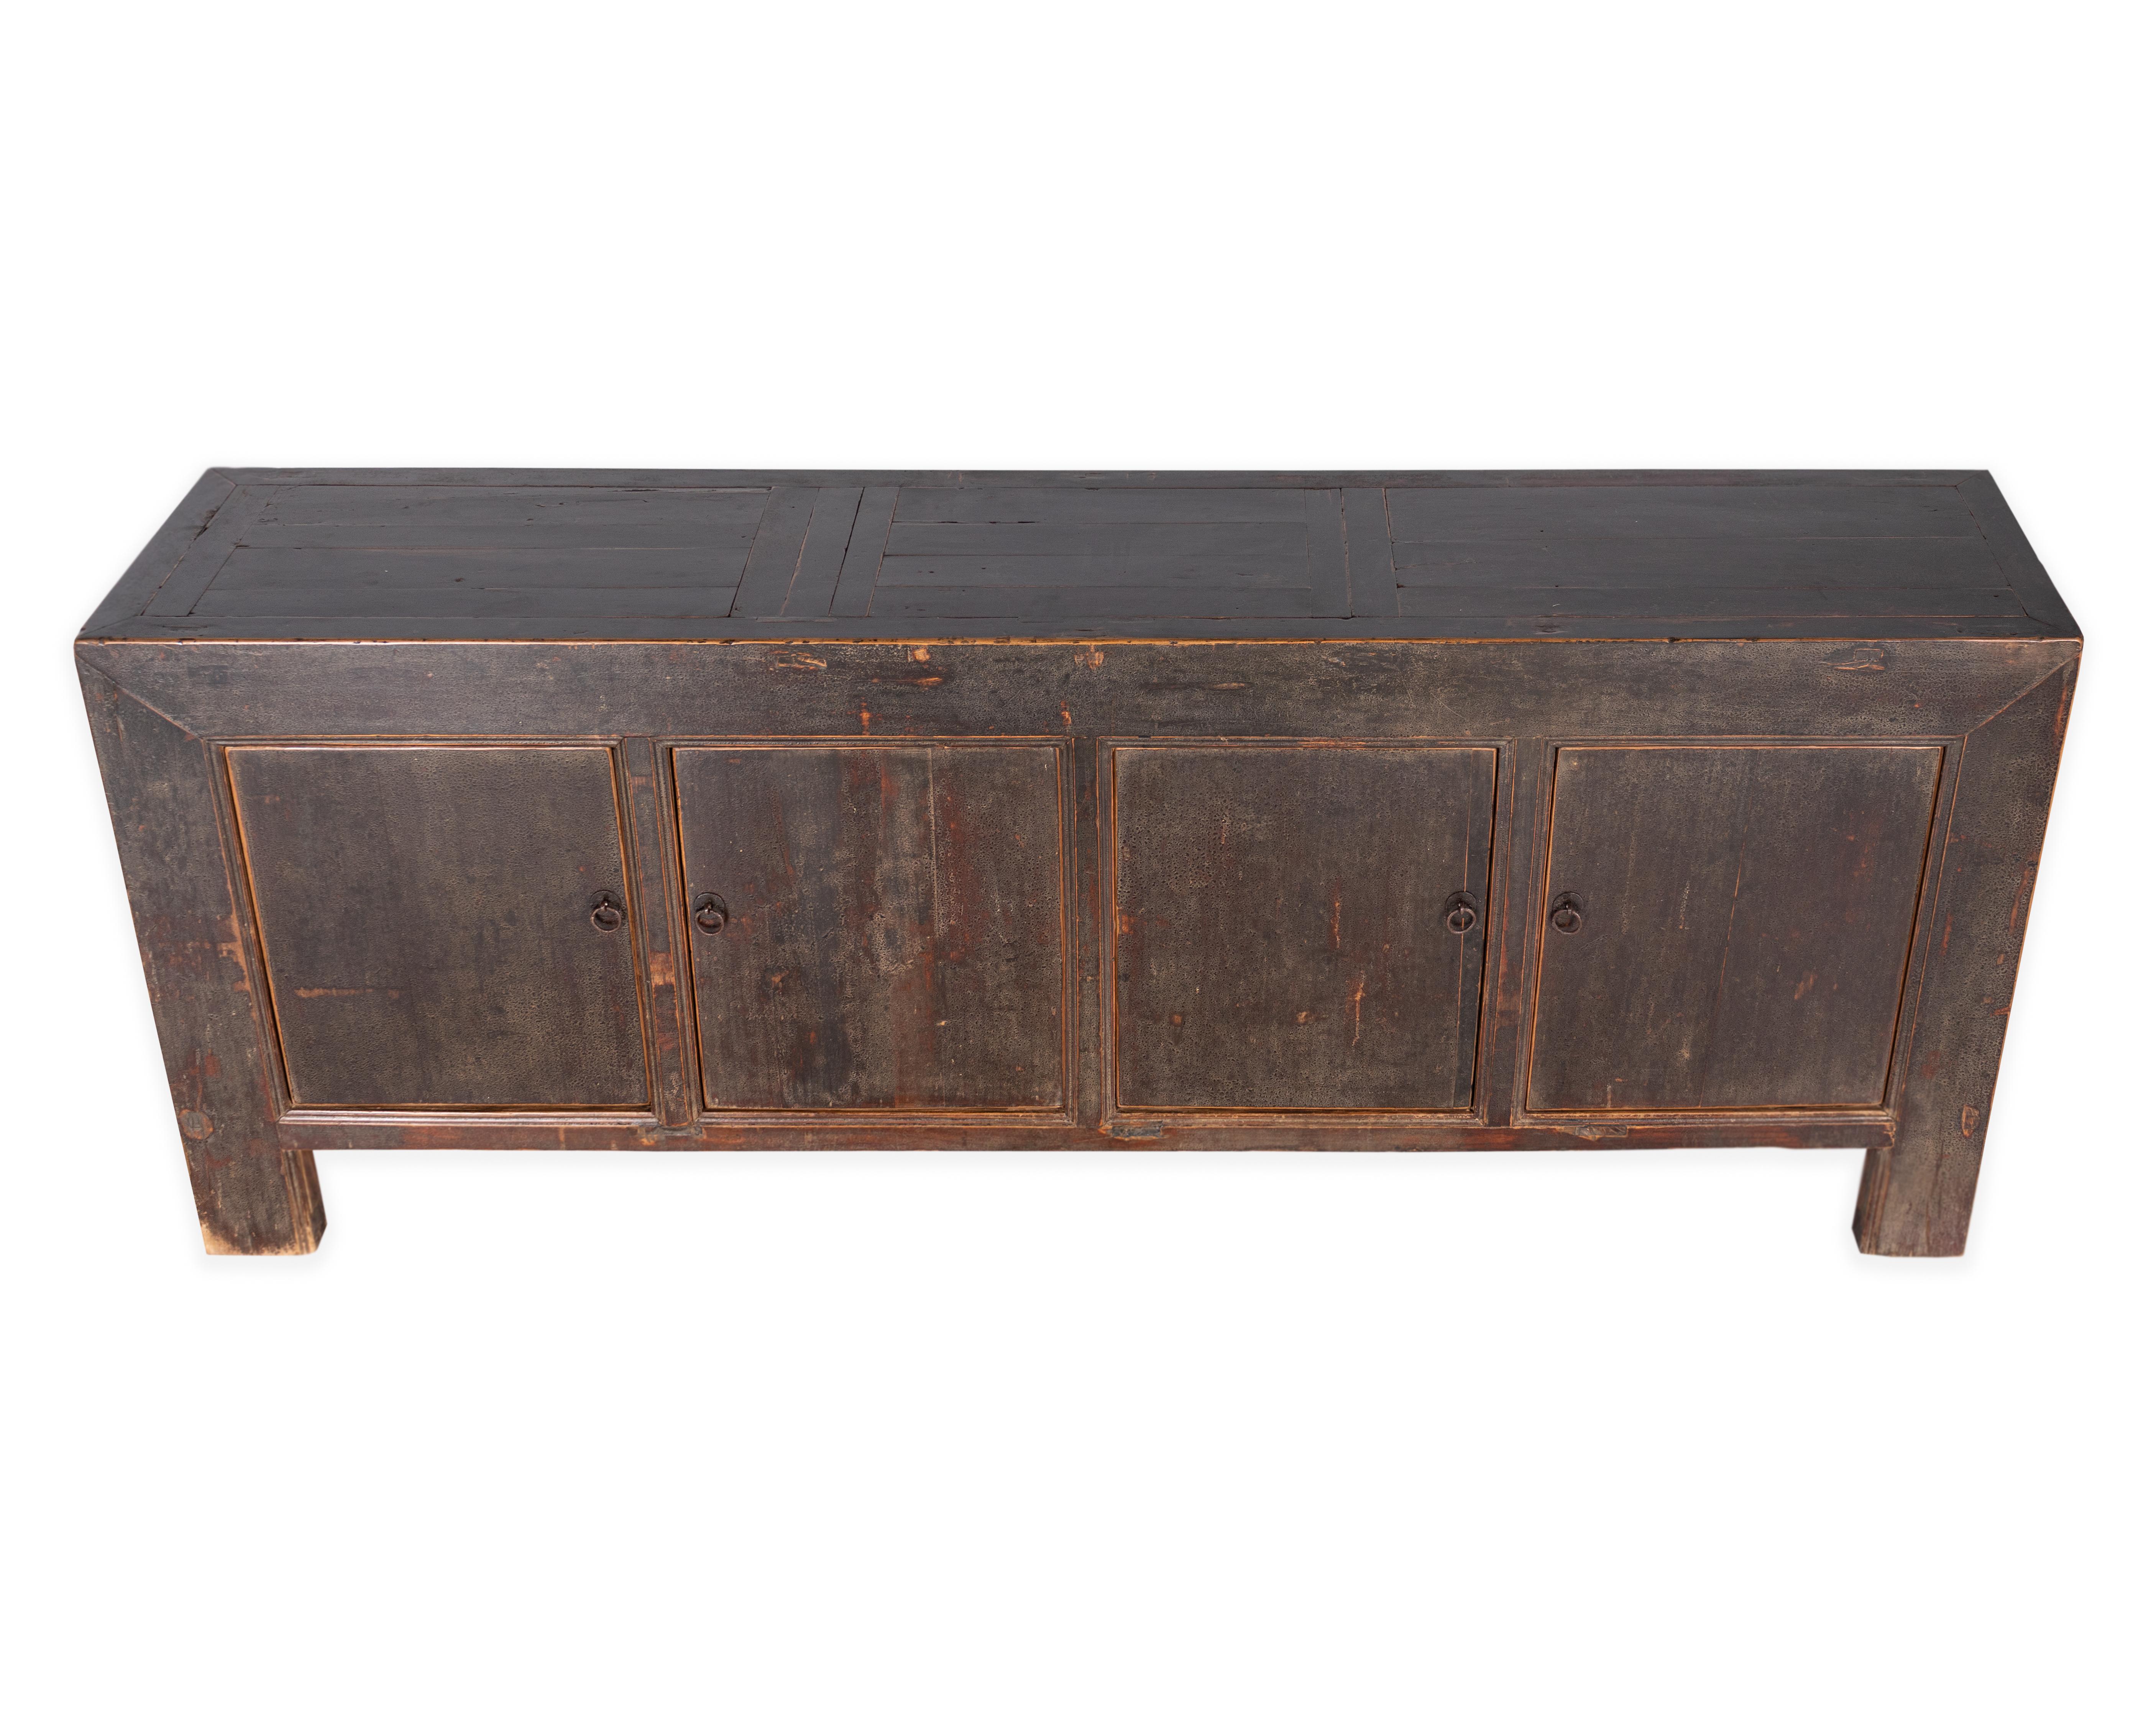 Four door server credenza in original crackle black paint patina. Made from distressed reclaimed elm wood. In my organic, contemporary, vintage and mid-century modern aesthetic.

Piece from the Le Monde collection. Exclusive to Brendan Bass.
 